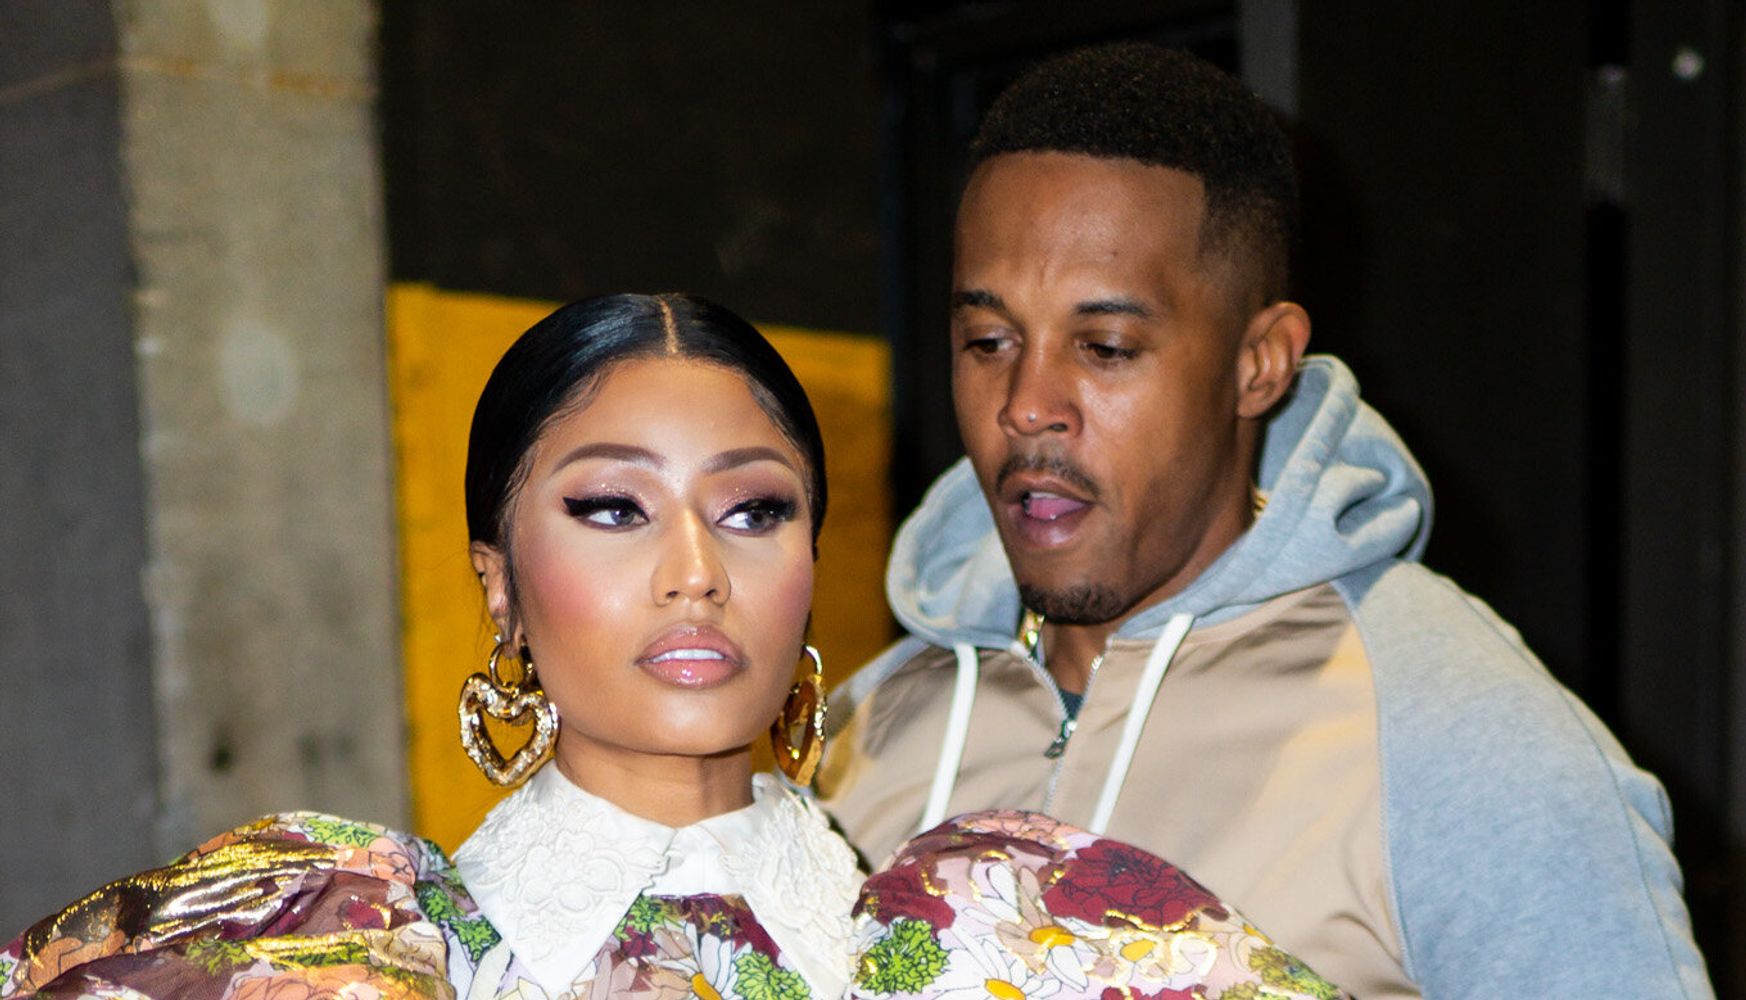 Woman Allegedly Raped By Nicki Minaj’s Husband Details How The Couple Harassed Her